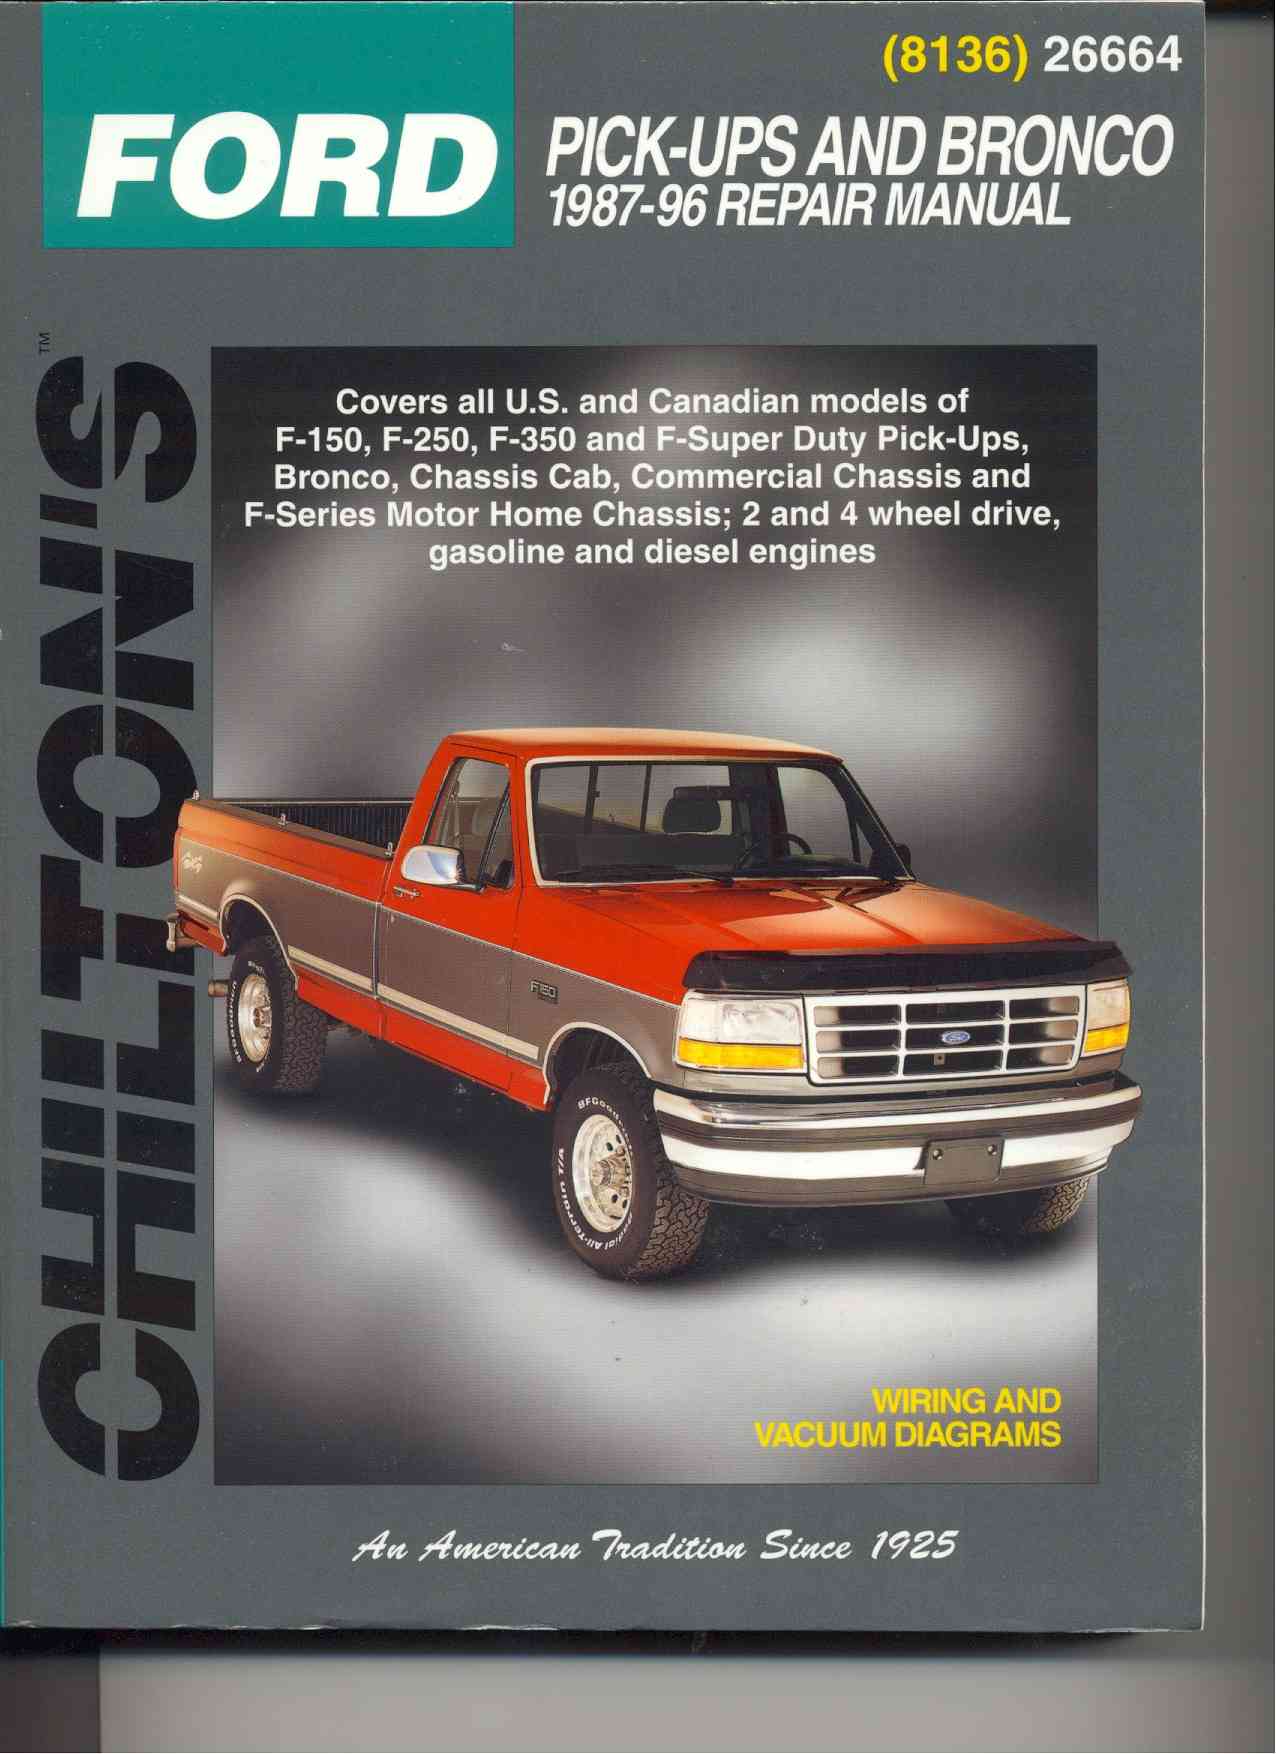 1988 Ford bronco ii online owners manual #6